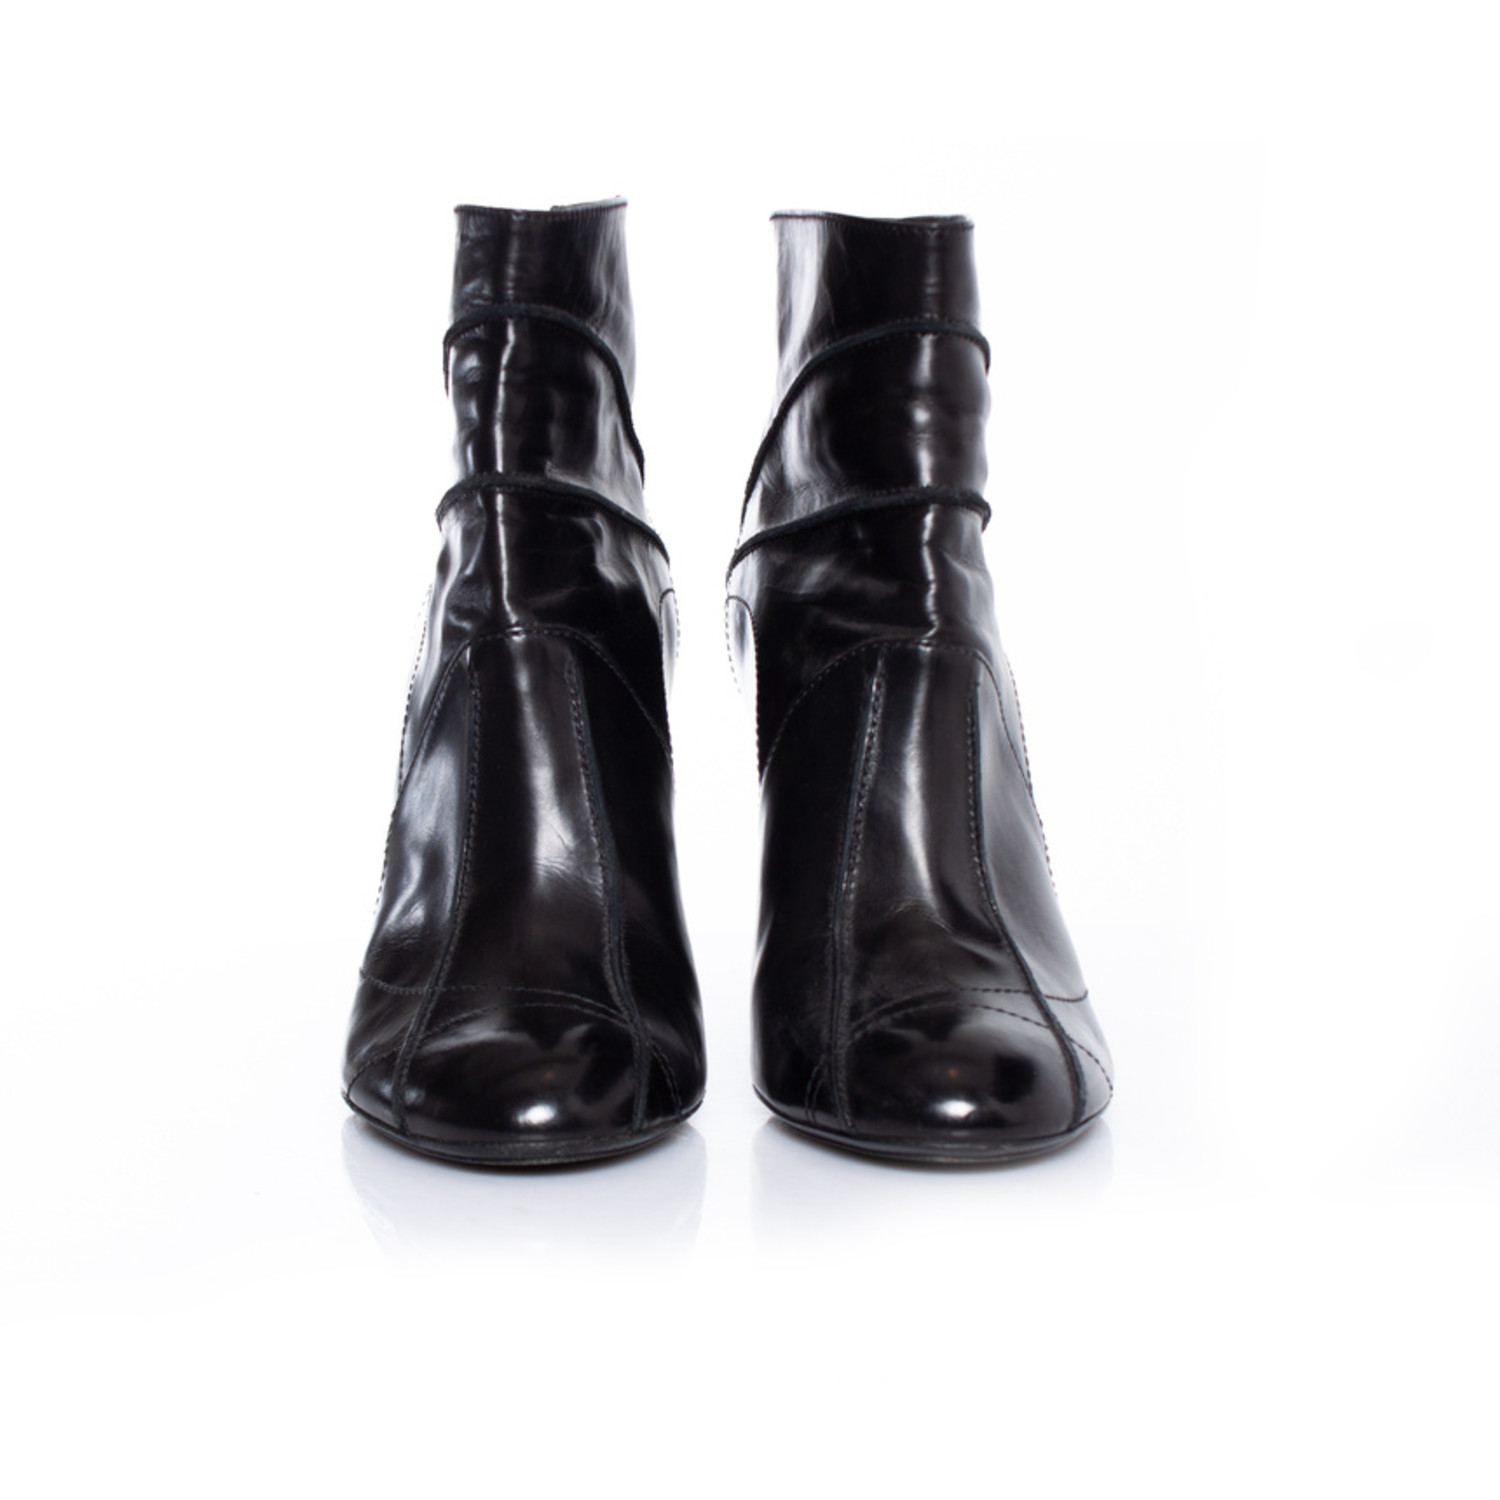 Leather ankle boots Dior Black size 37.5 EU in Leather - 25104677